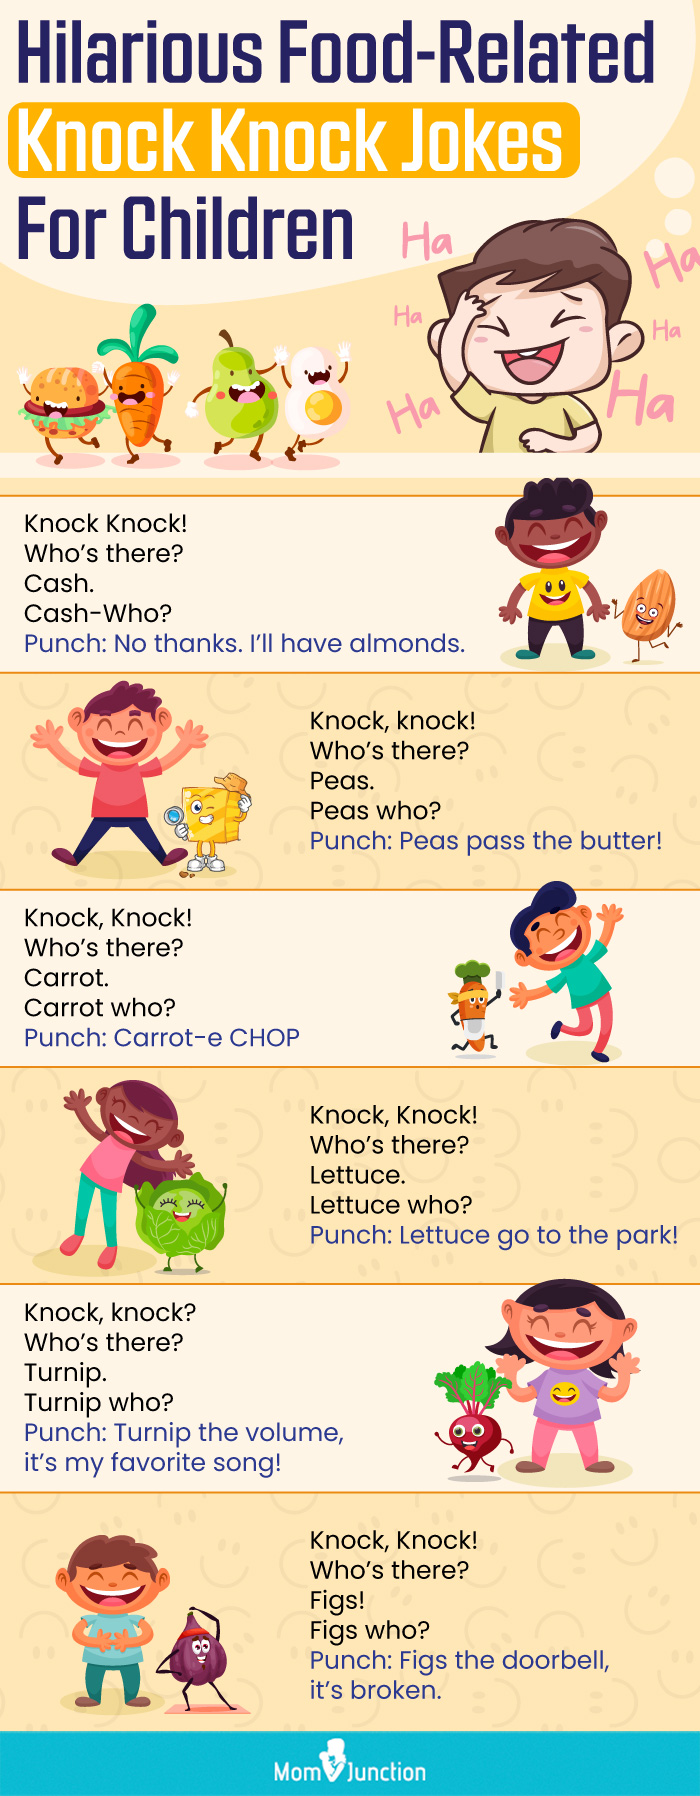 hilarious food related knock knock jokes for children (infographic)